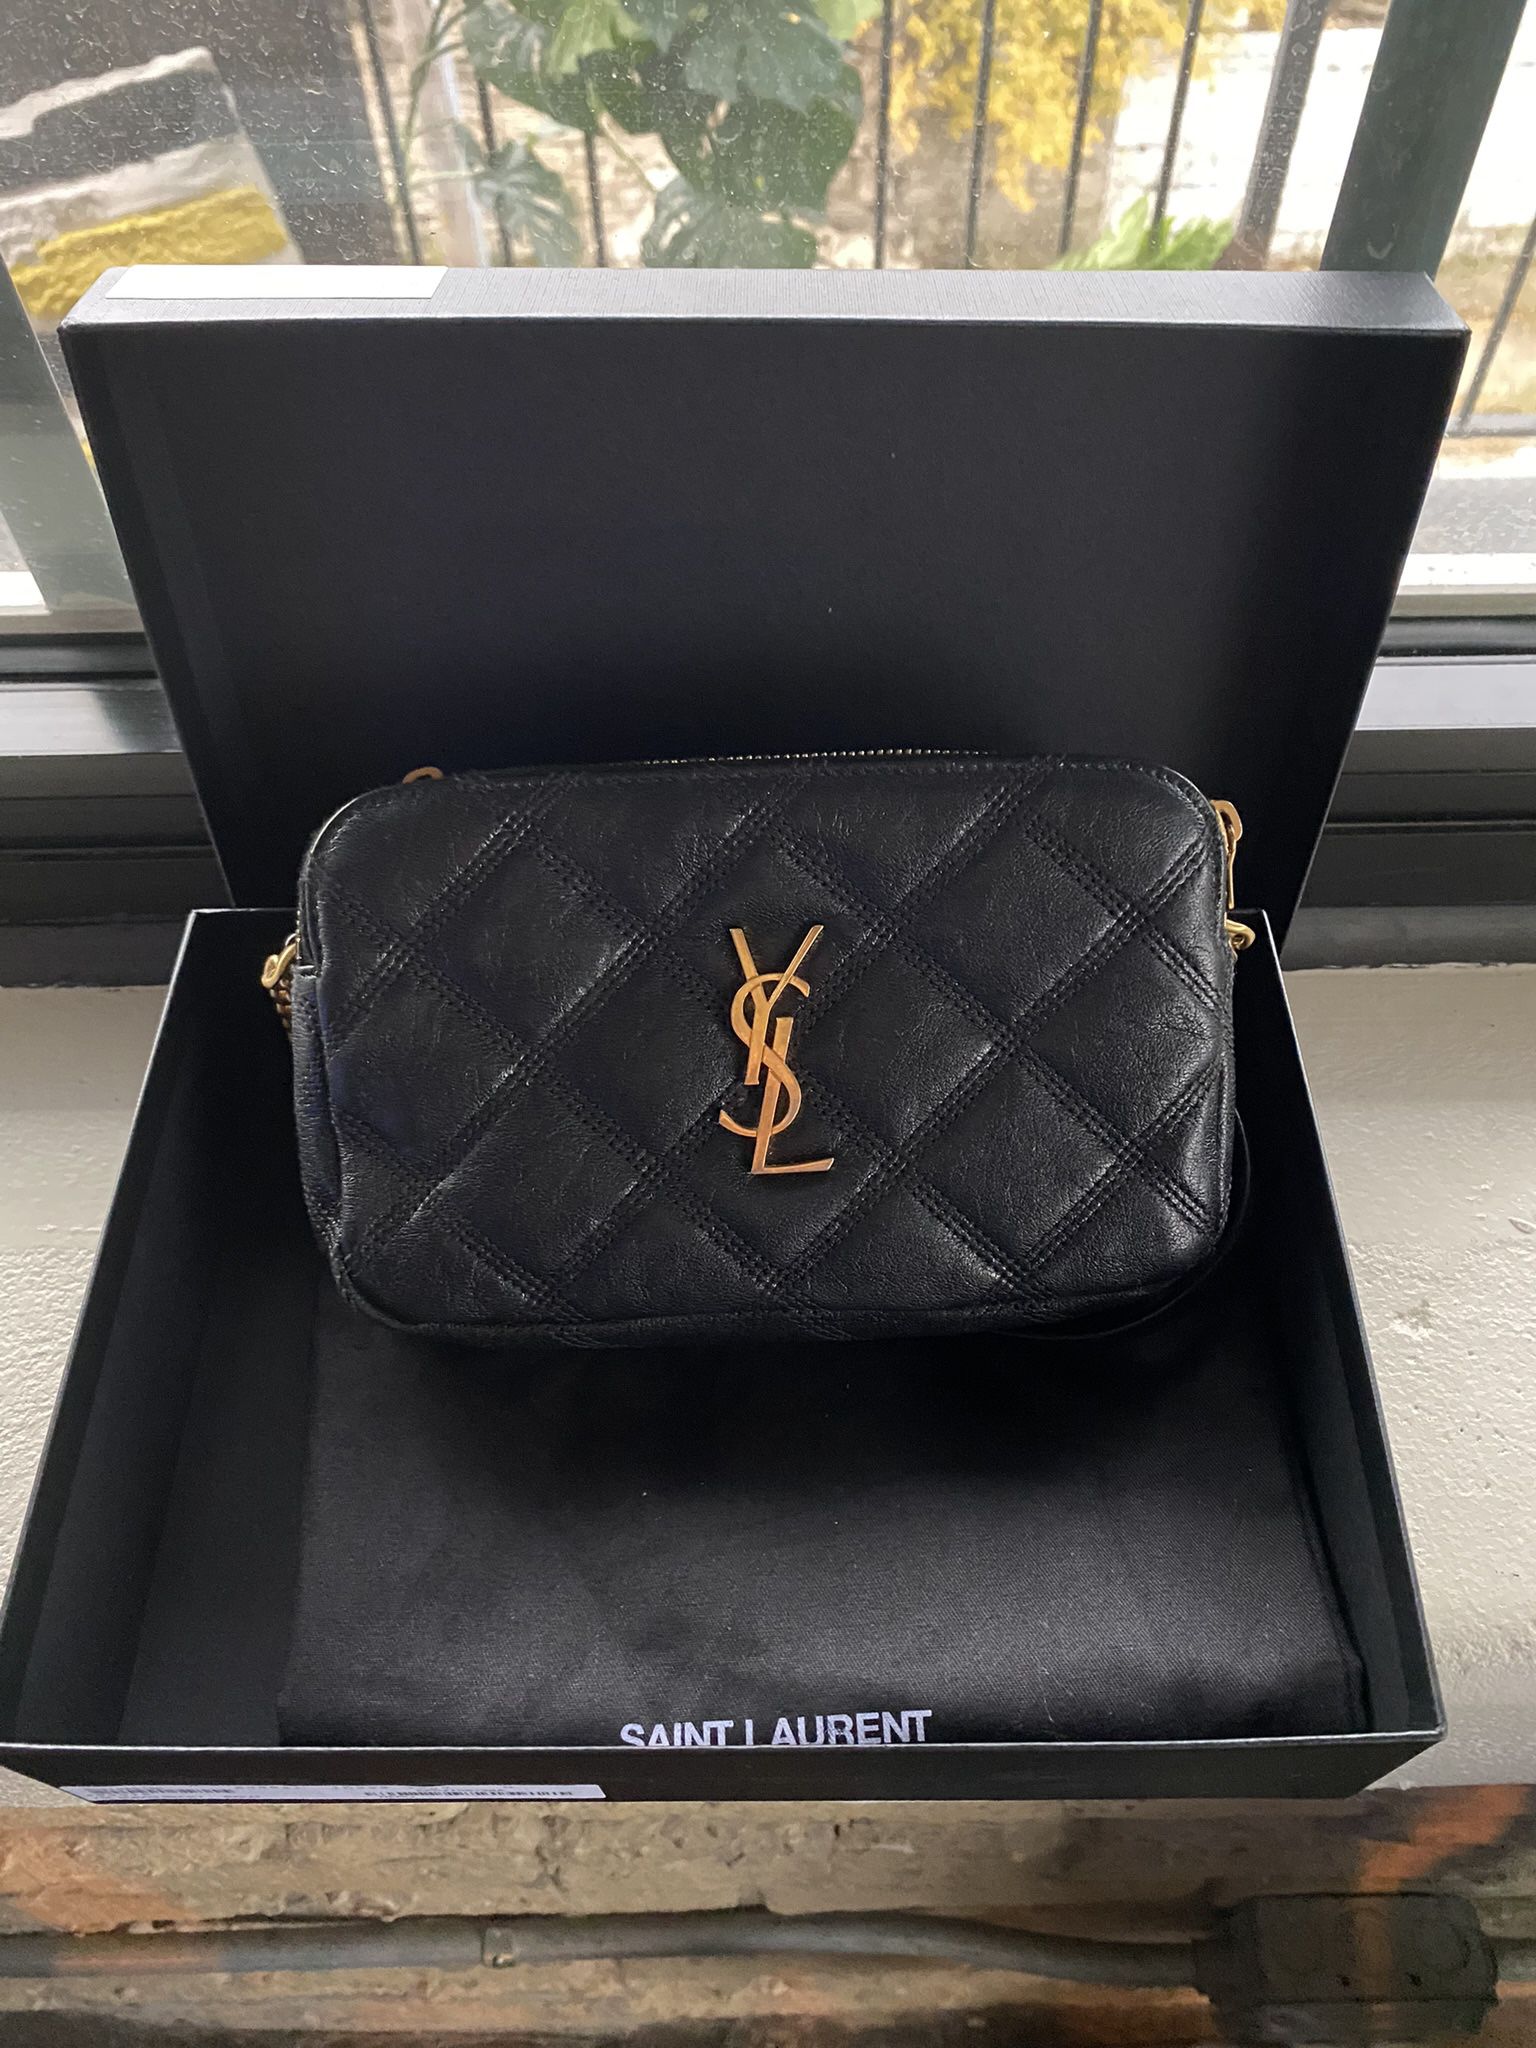 $400 NWT MICHAEL KORS PIPER GOLD STUDDED POCHETTE ZIP CHAIN LOGO SHOULDER  BAG for Sale in Lake In The Hills, IL - OfferUp